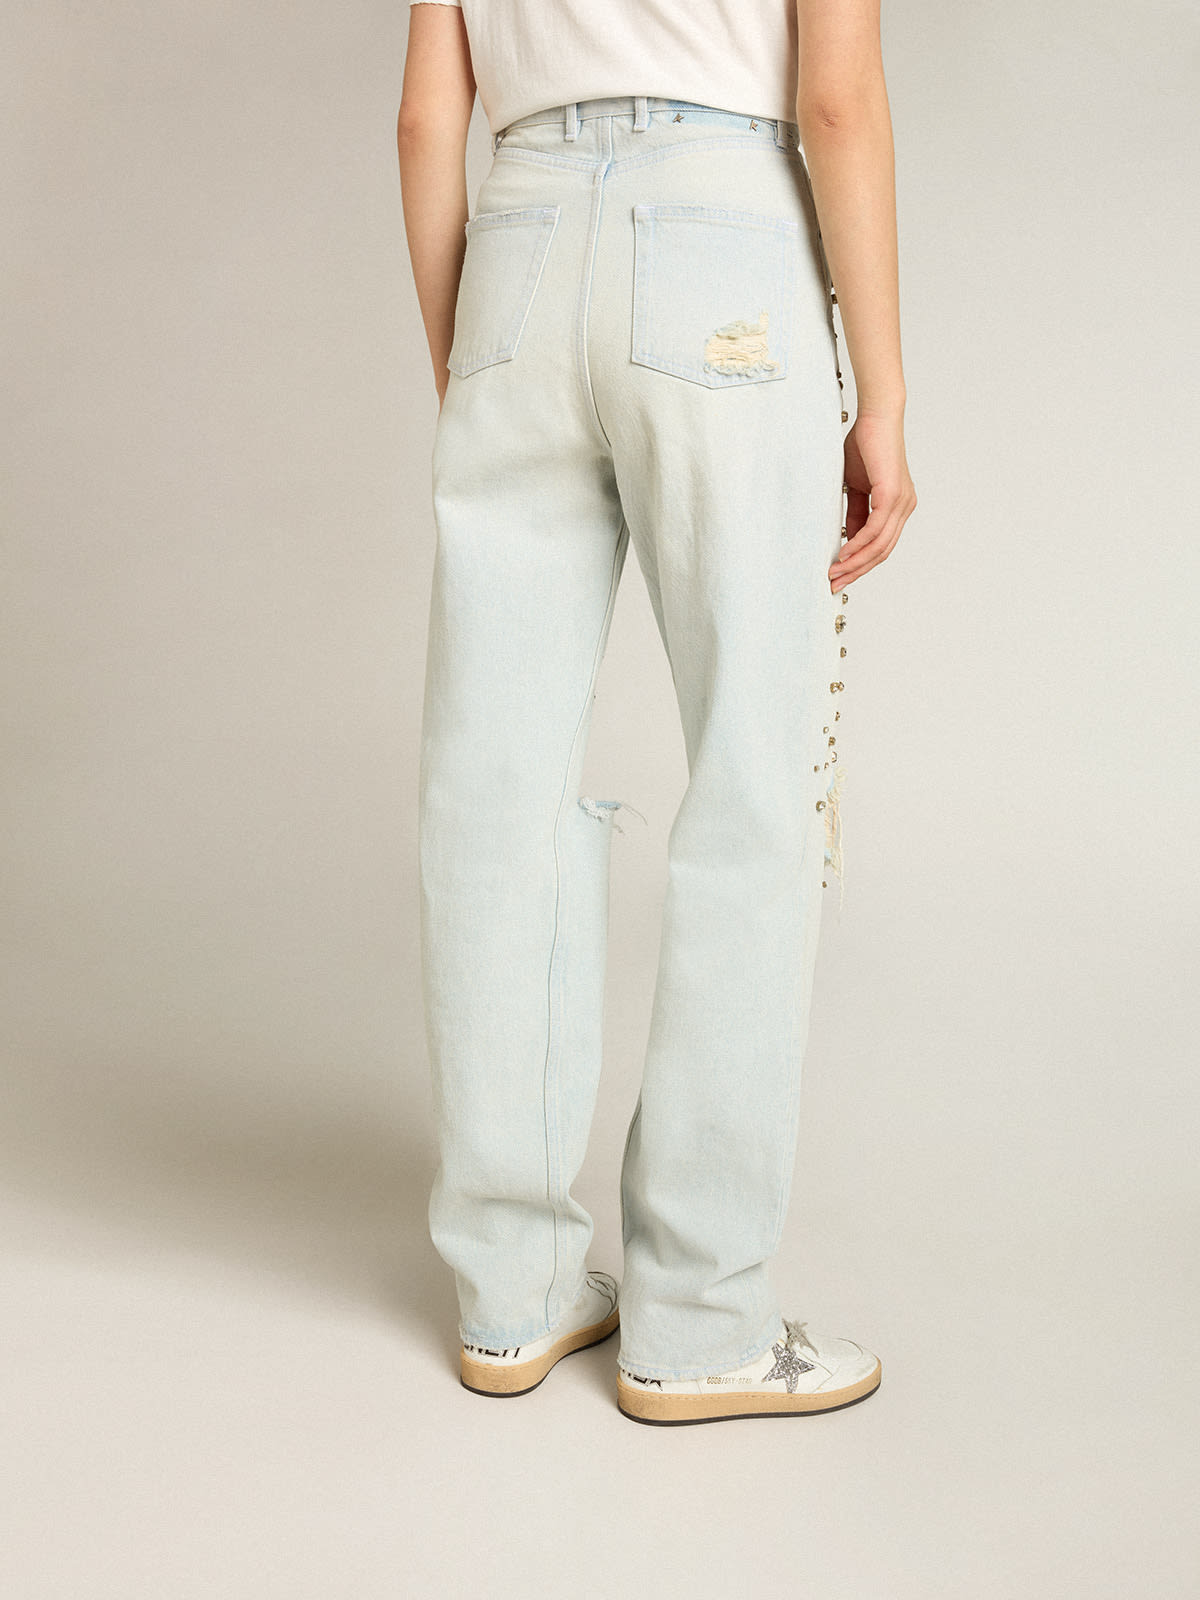 Golden Goose - Women's bleached jeans with cabochon crystals in 